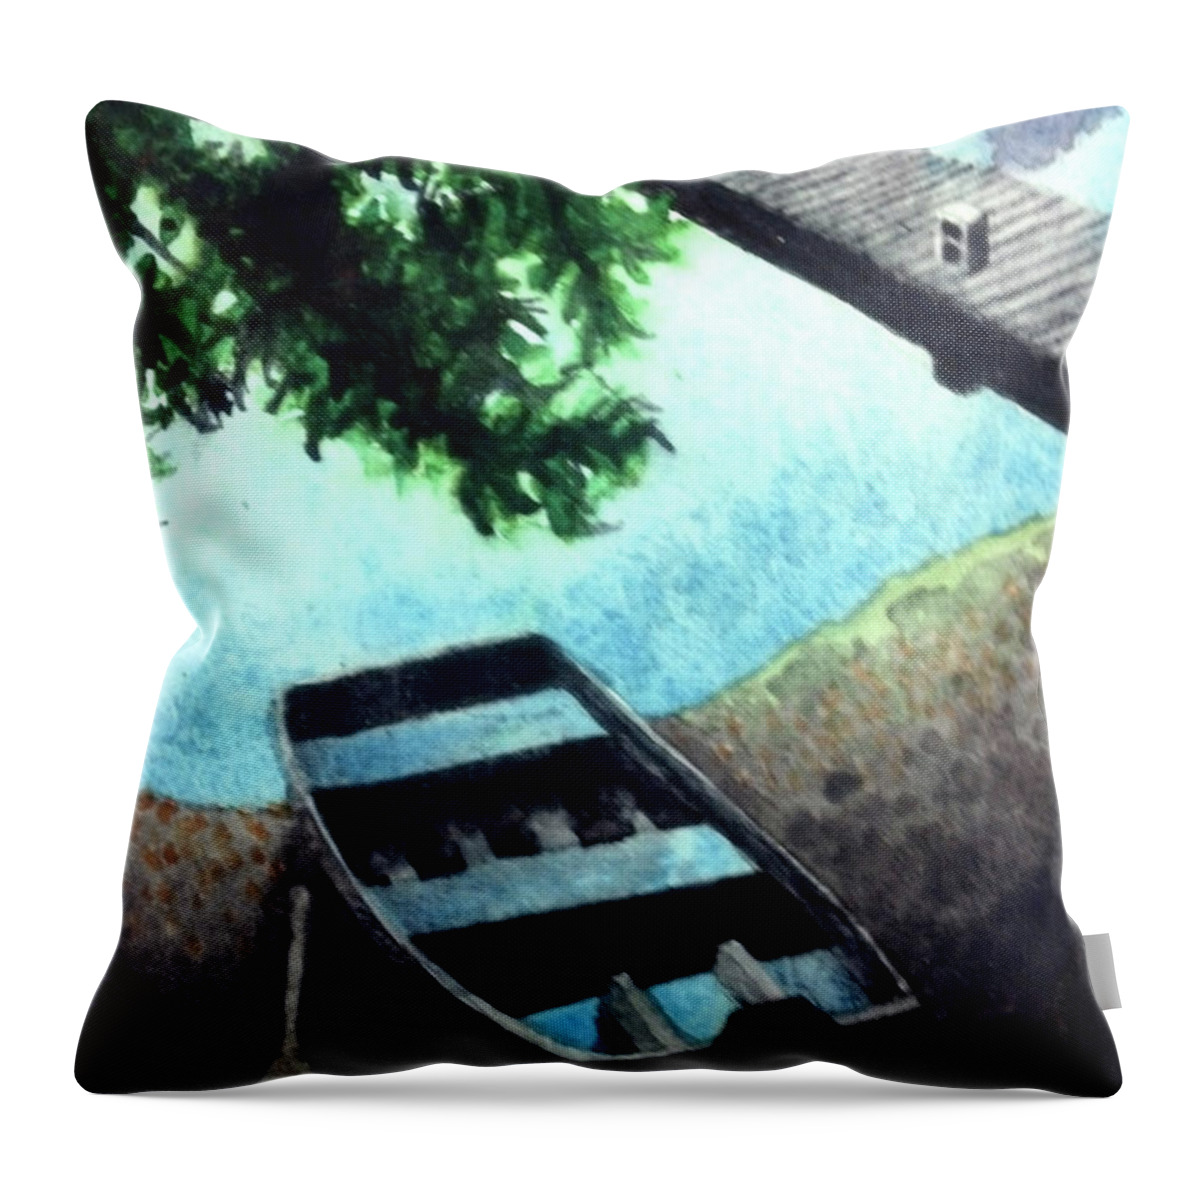 Watercolor Throw Pillow featuring the drawing Water Moccasin Rowboat by Ceilon Aspensen